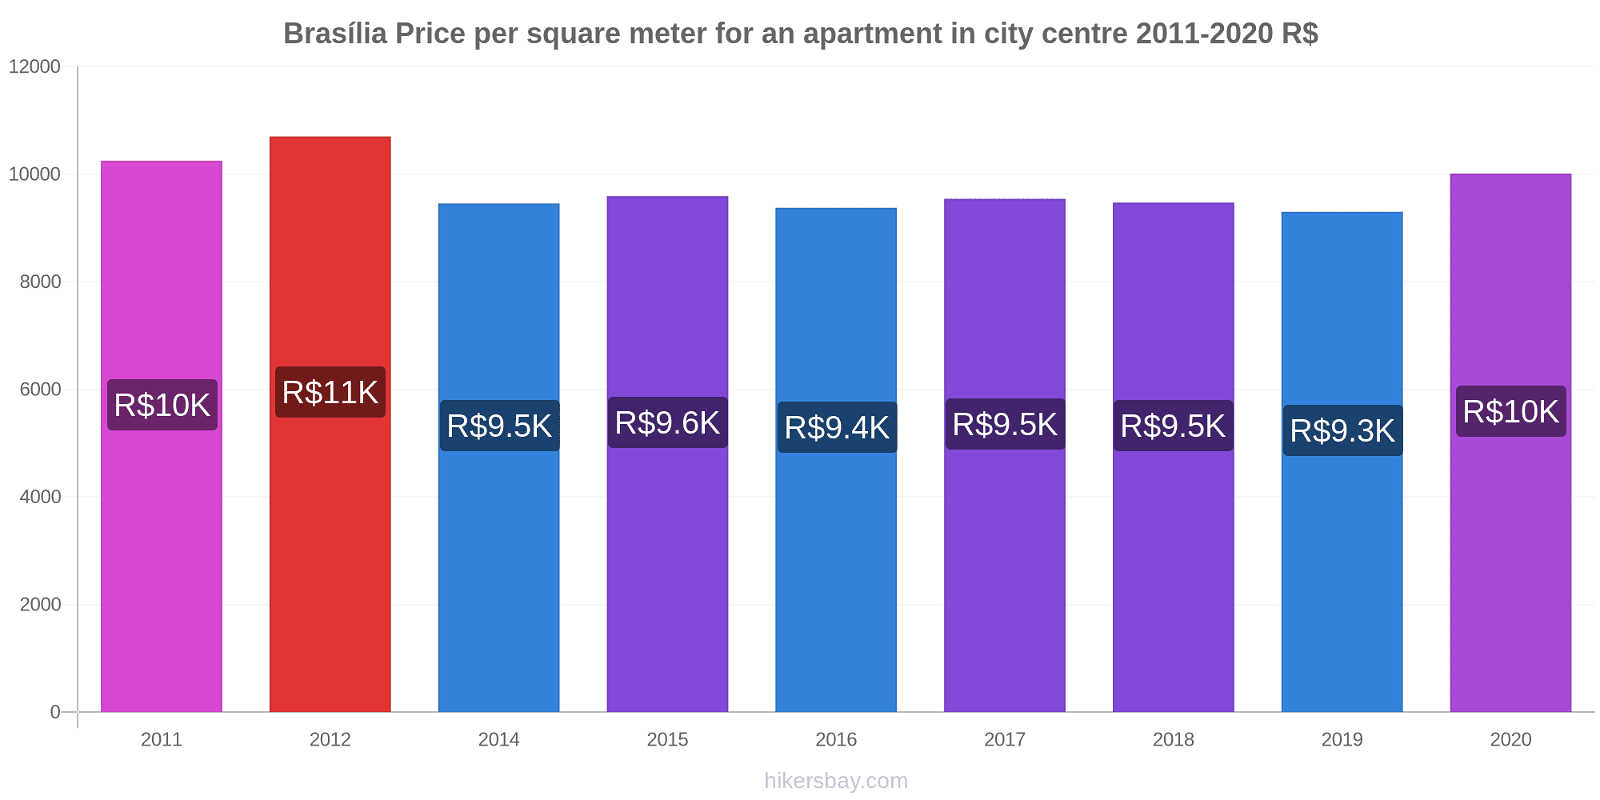 Brasília price changes Price per square meter for an apartment in city centre hikersbay.com